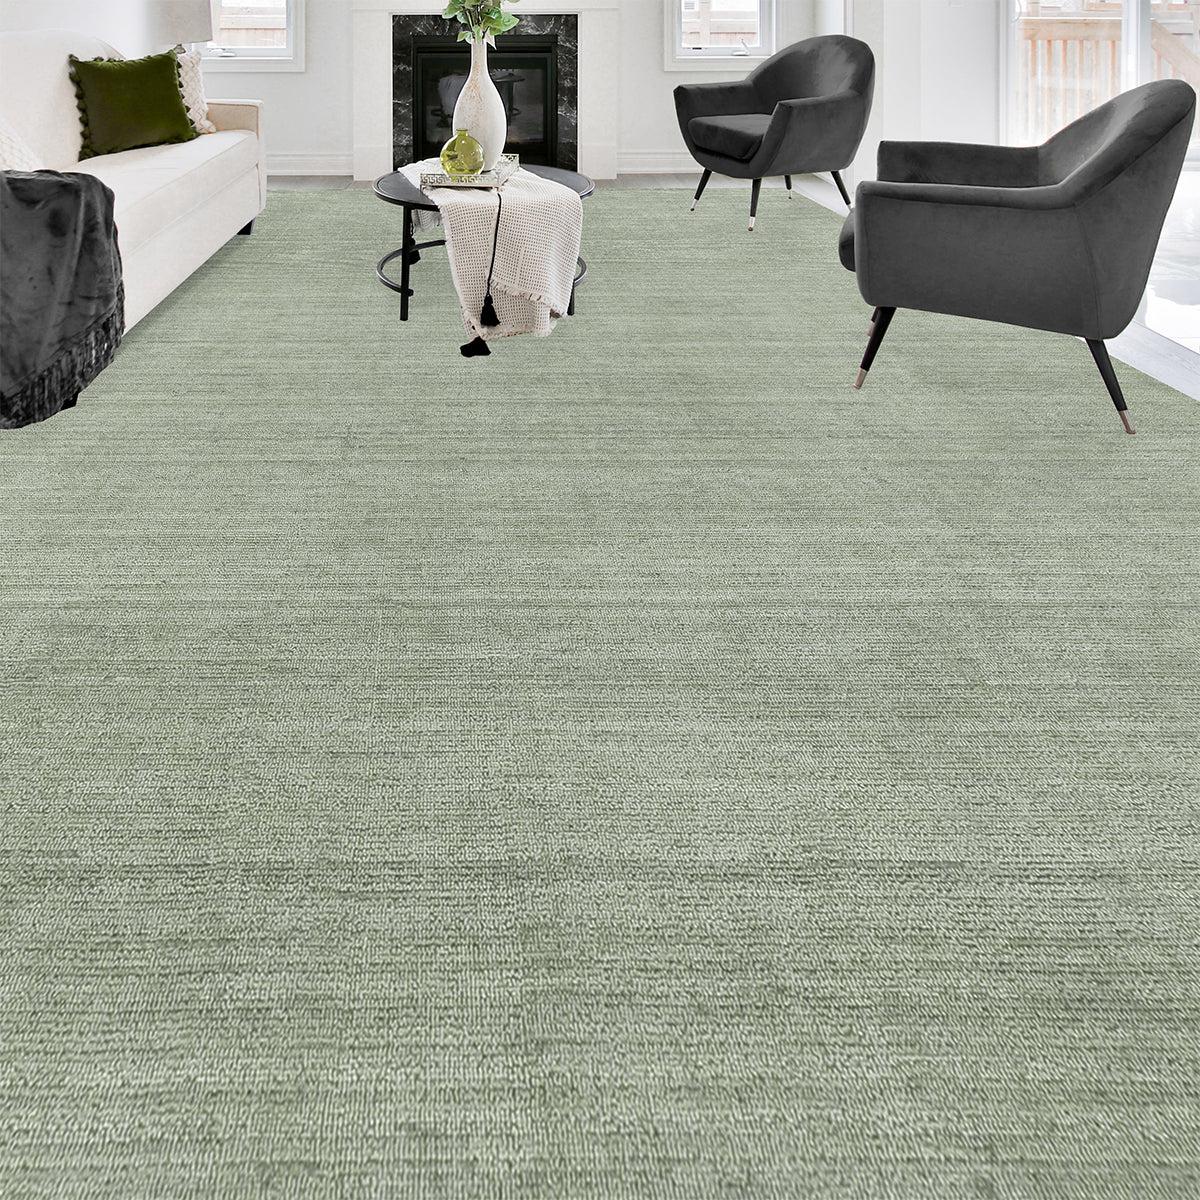 A subtle sense of texture is created by the high/low surface of this sophisticated collection of hand-loomed designs. This Luxurious Light Green rug composed of the finest viscose, has a surface that is as soft to the hand as it is rich to the eye.